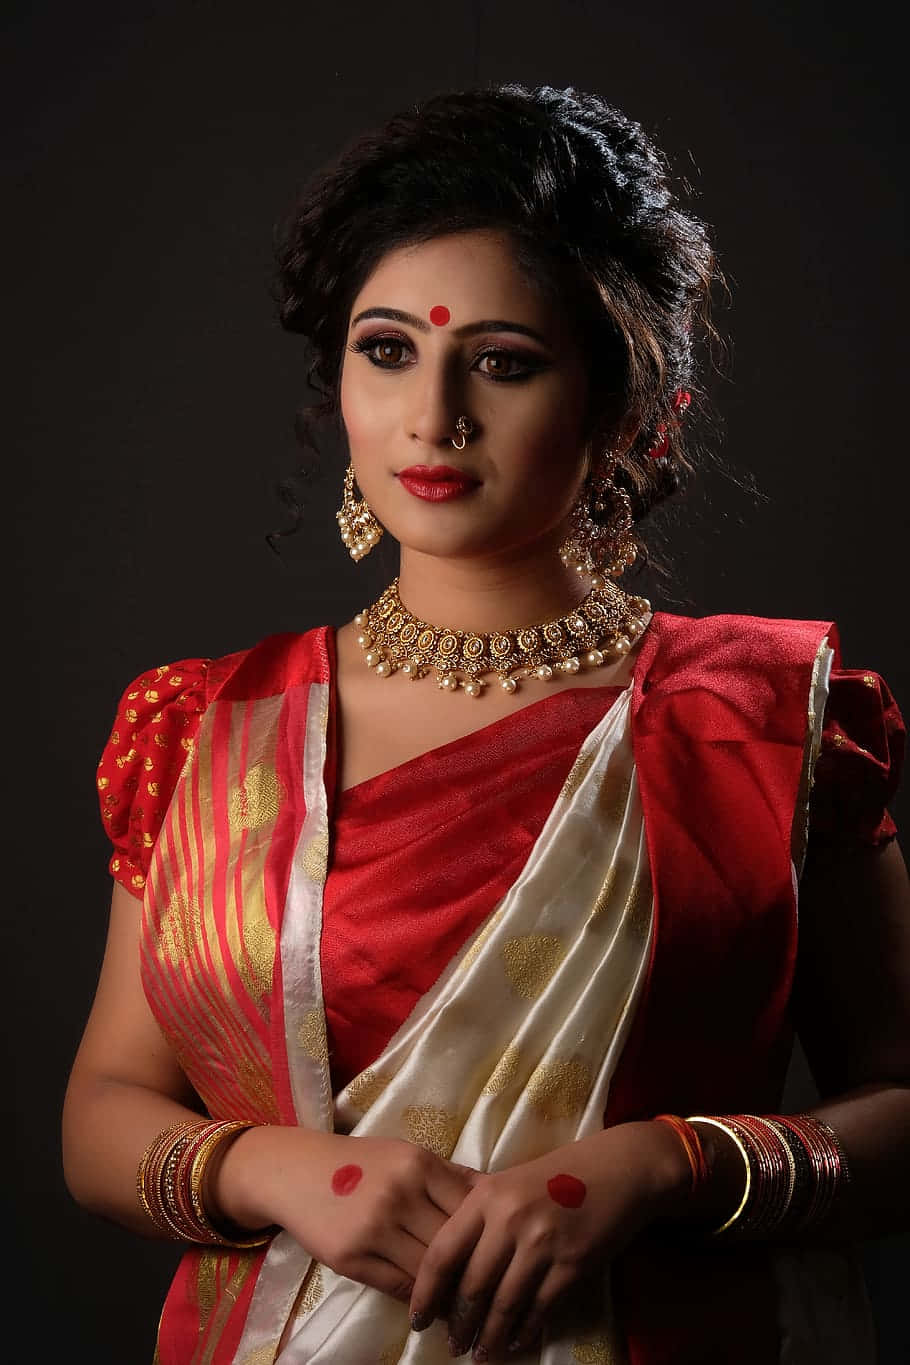 Captivating Indian Beauty In Red Background